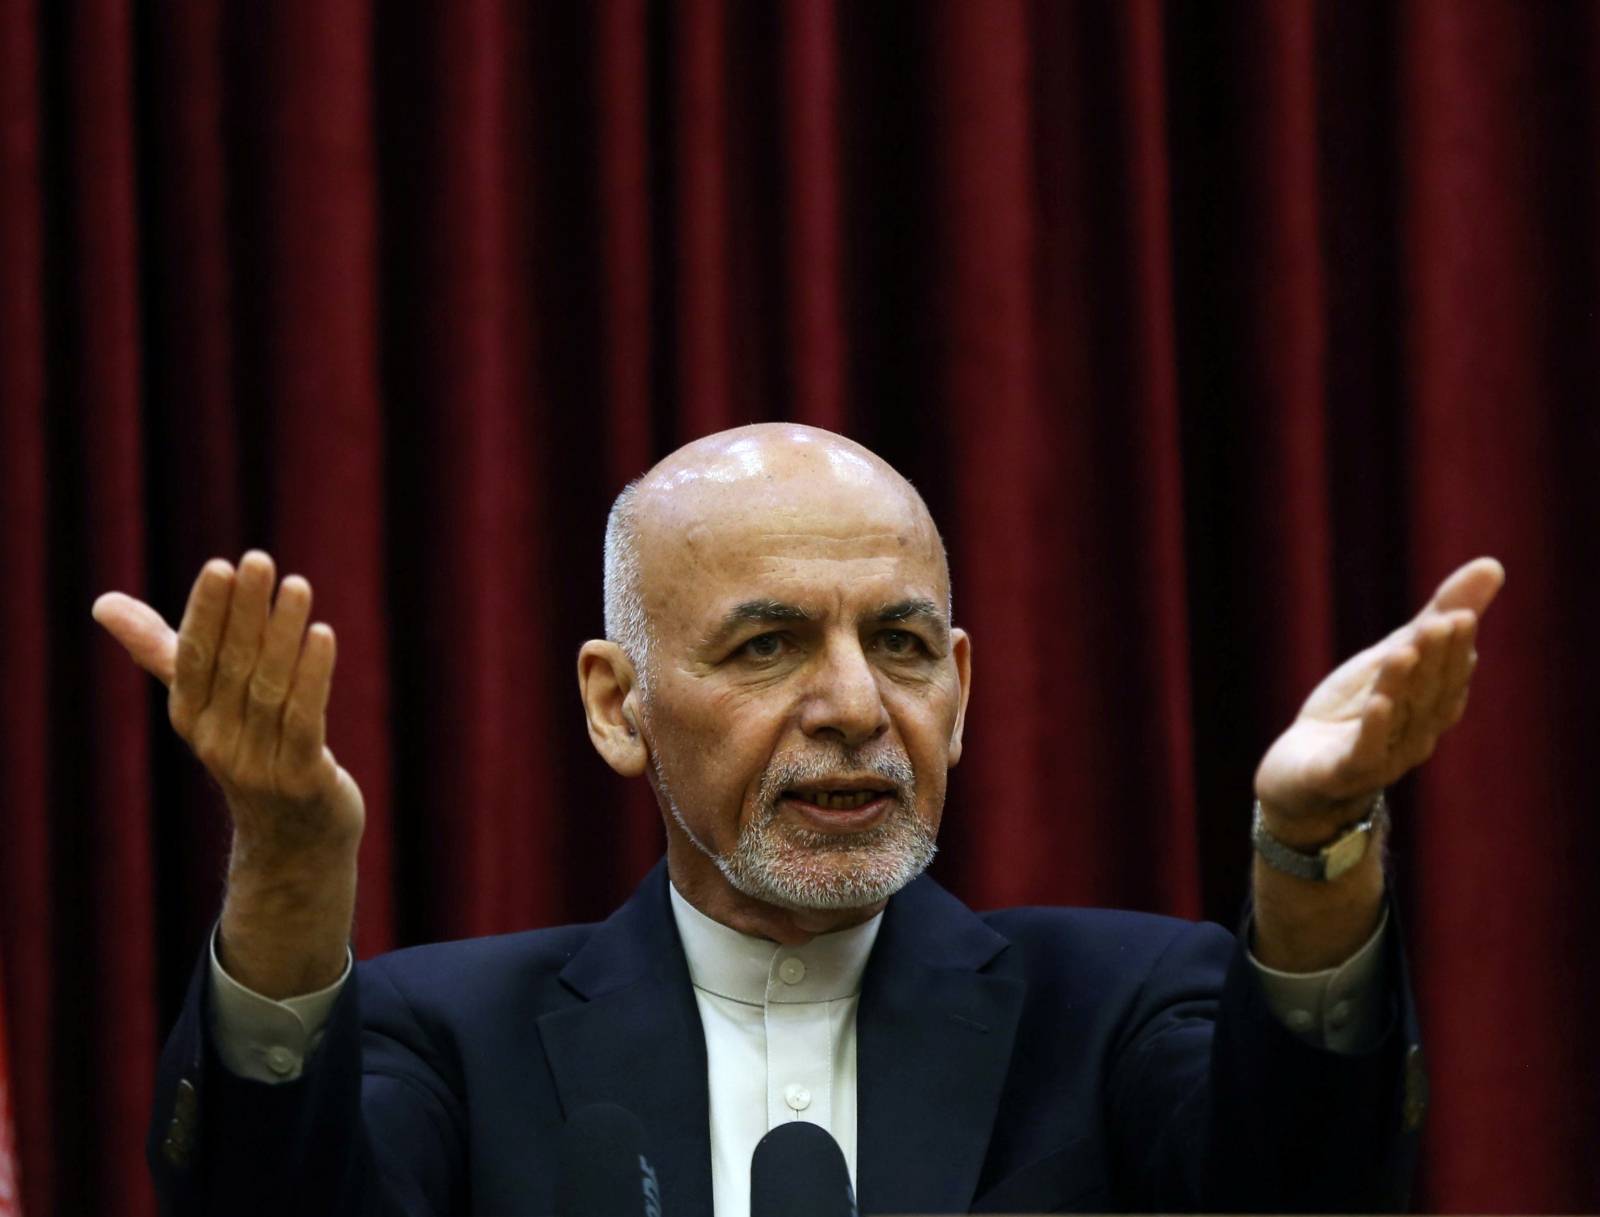 Afghanistan's President Ashraf Ghani speaks during a news conference in Kabul